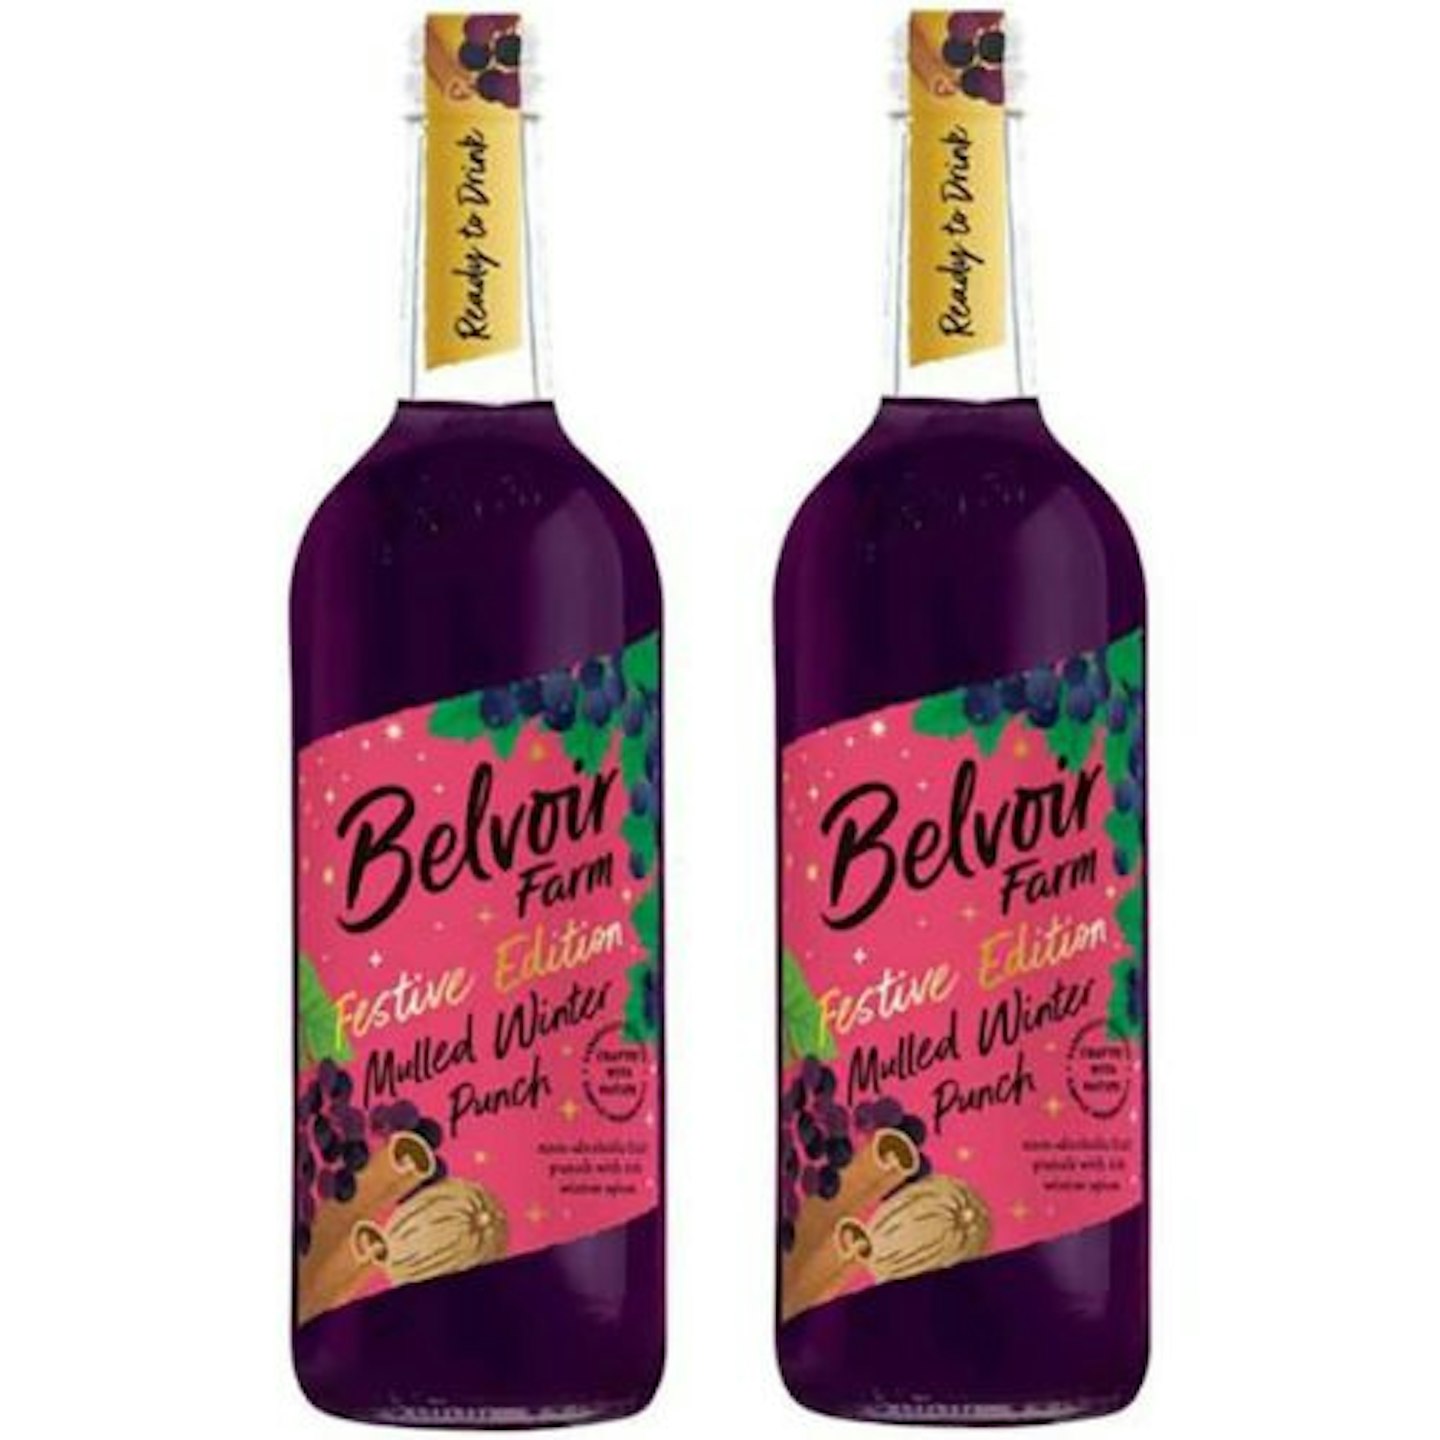 Best non-alcoholic drinks Belvoir Non-Alcoholic Mulled Winter Punch